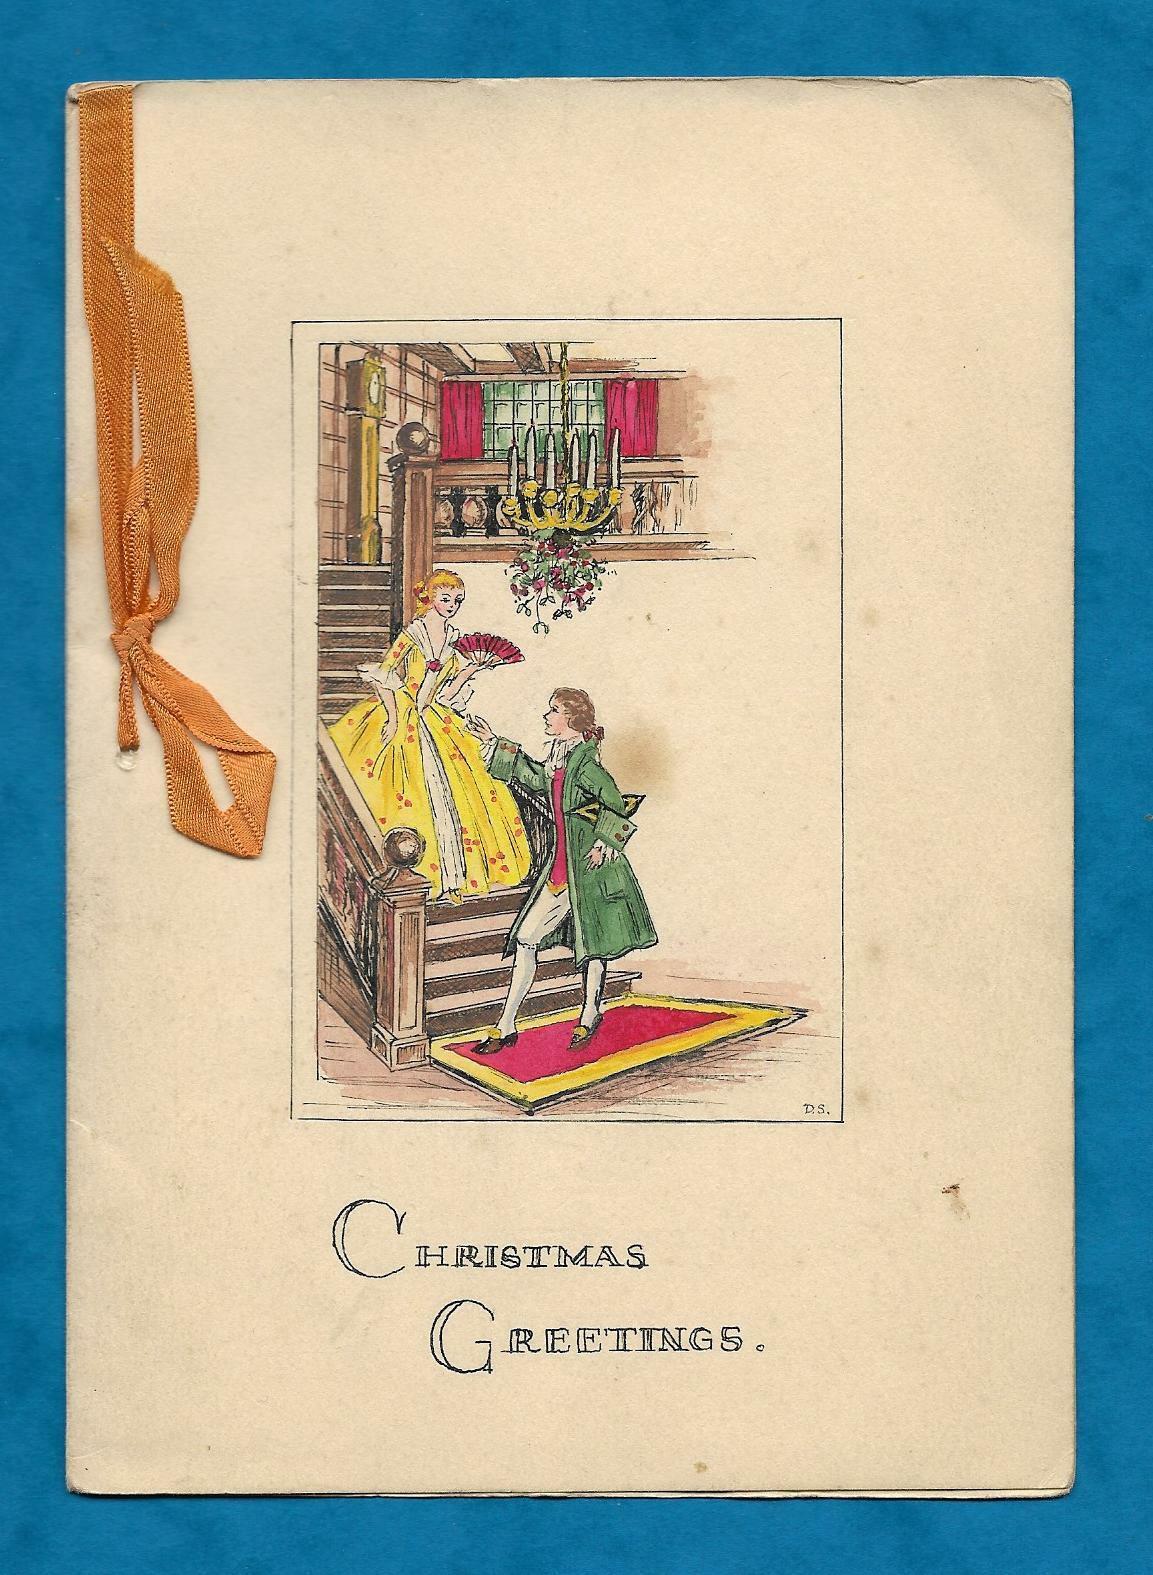 C1930s SUPERB HAND-PAINTED CHRISTMAS CARD - GEORGIAN STYLE COUPLE ON STAIRS